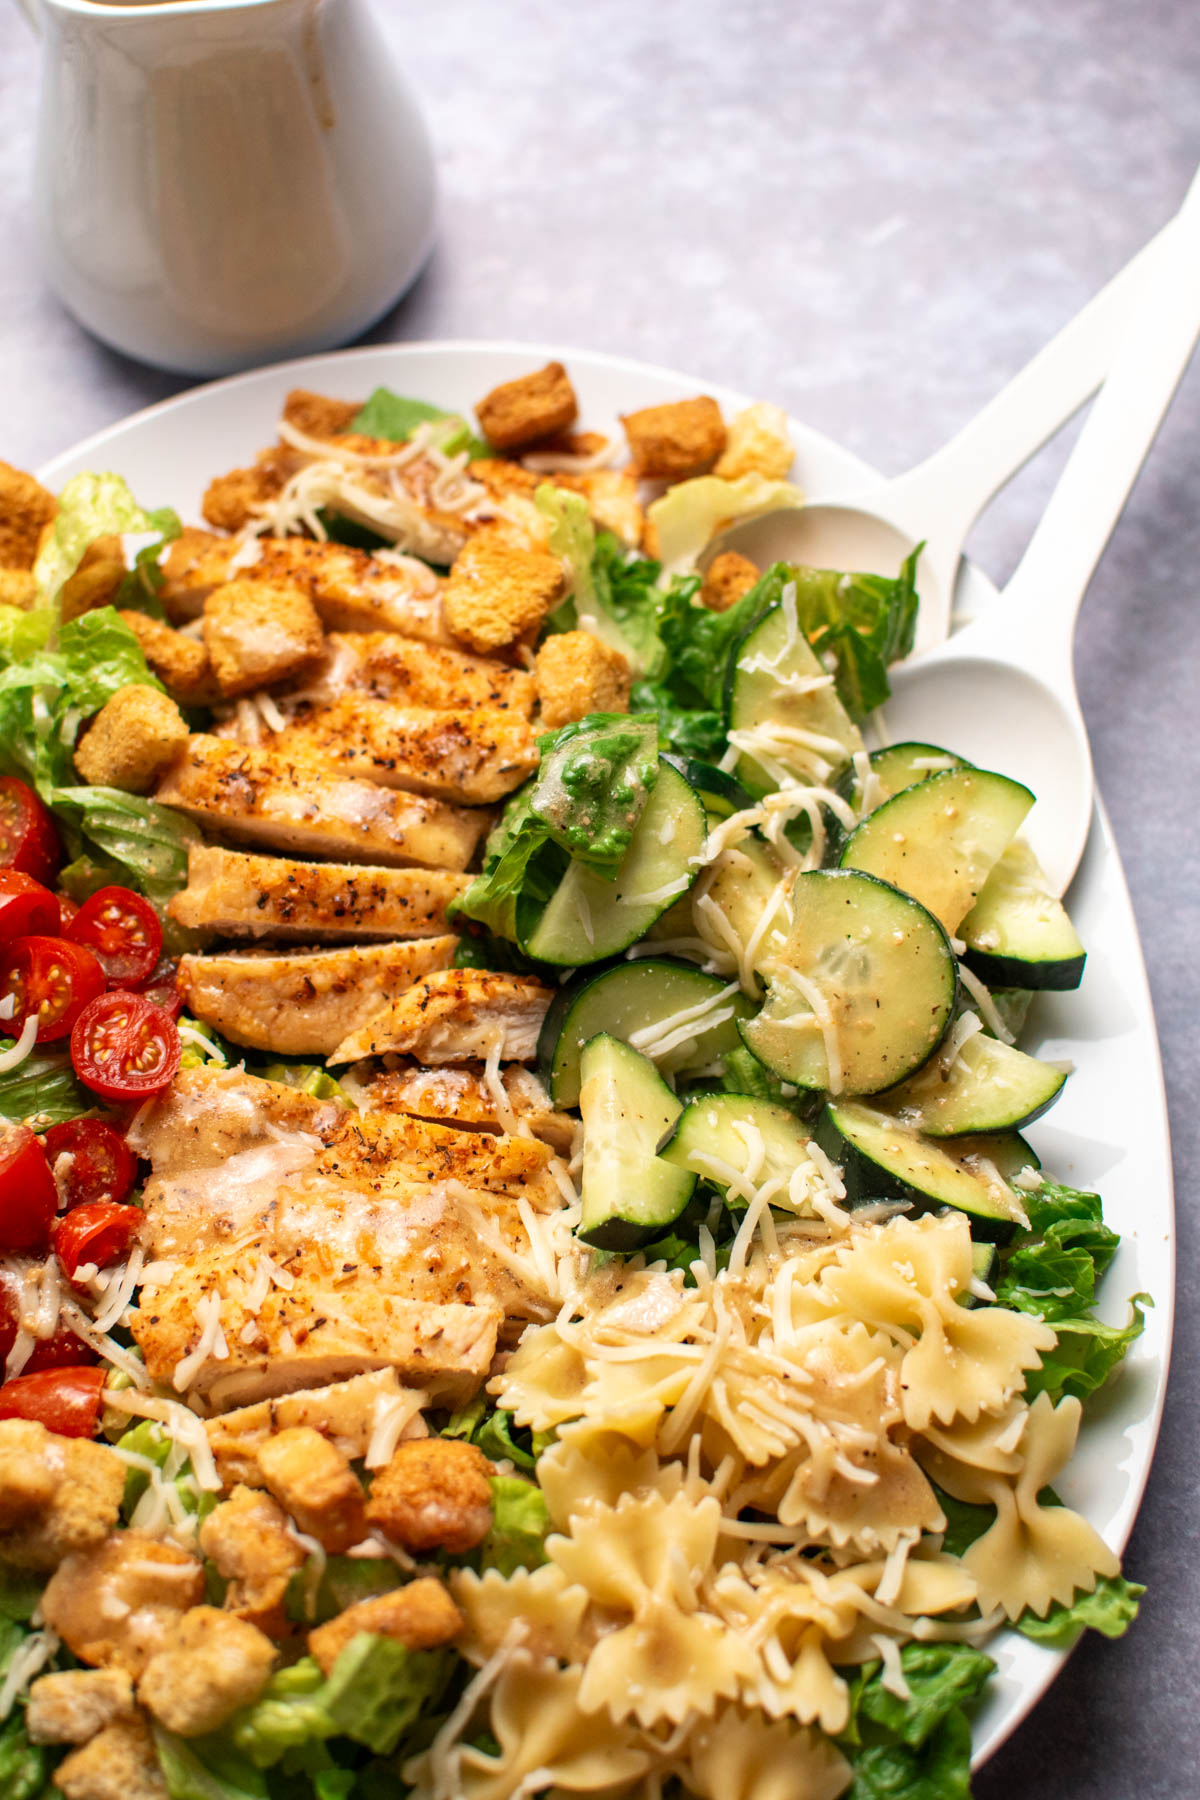 Two salad spoons rest in chicken Caesar salad with pasta, cucumbers, and croutons.